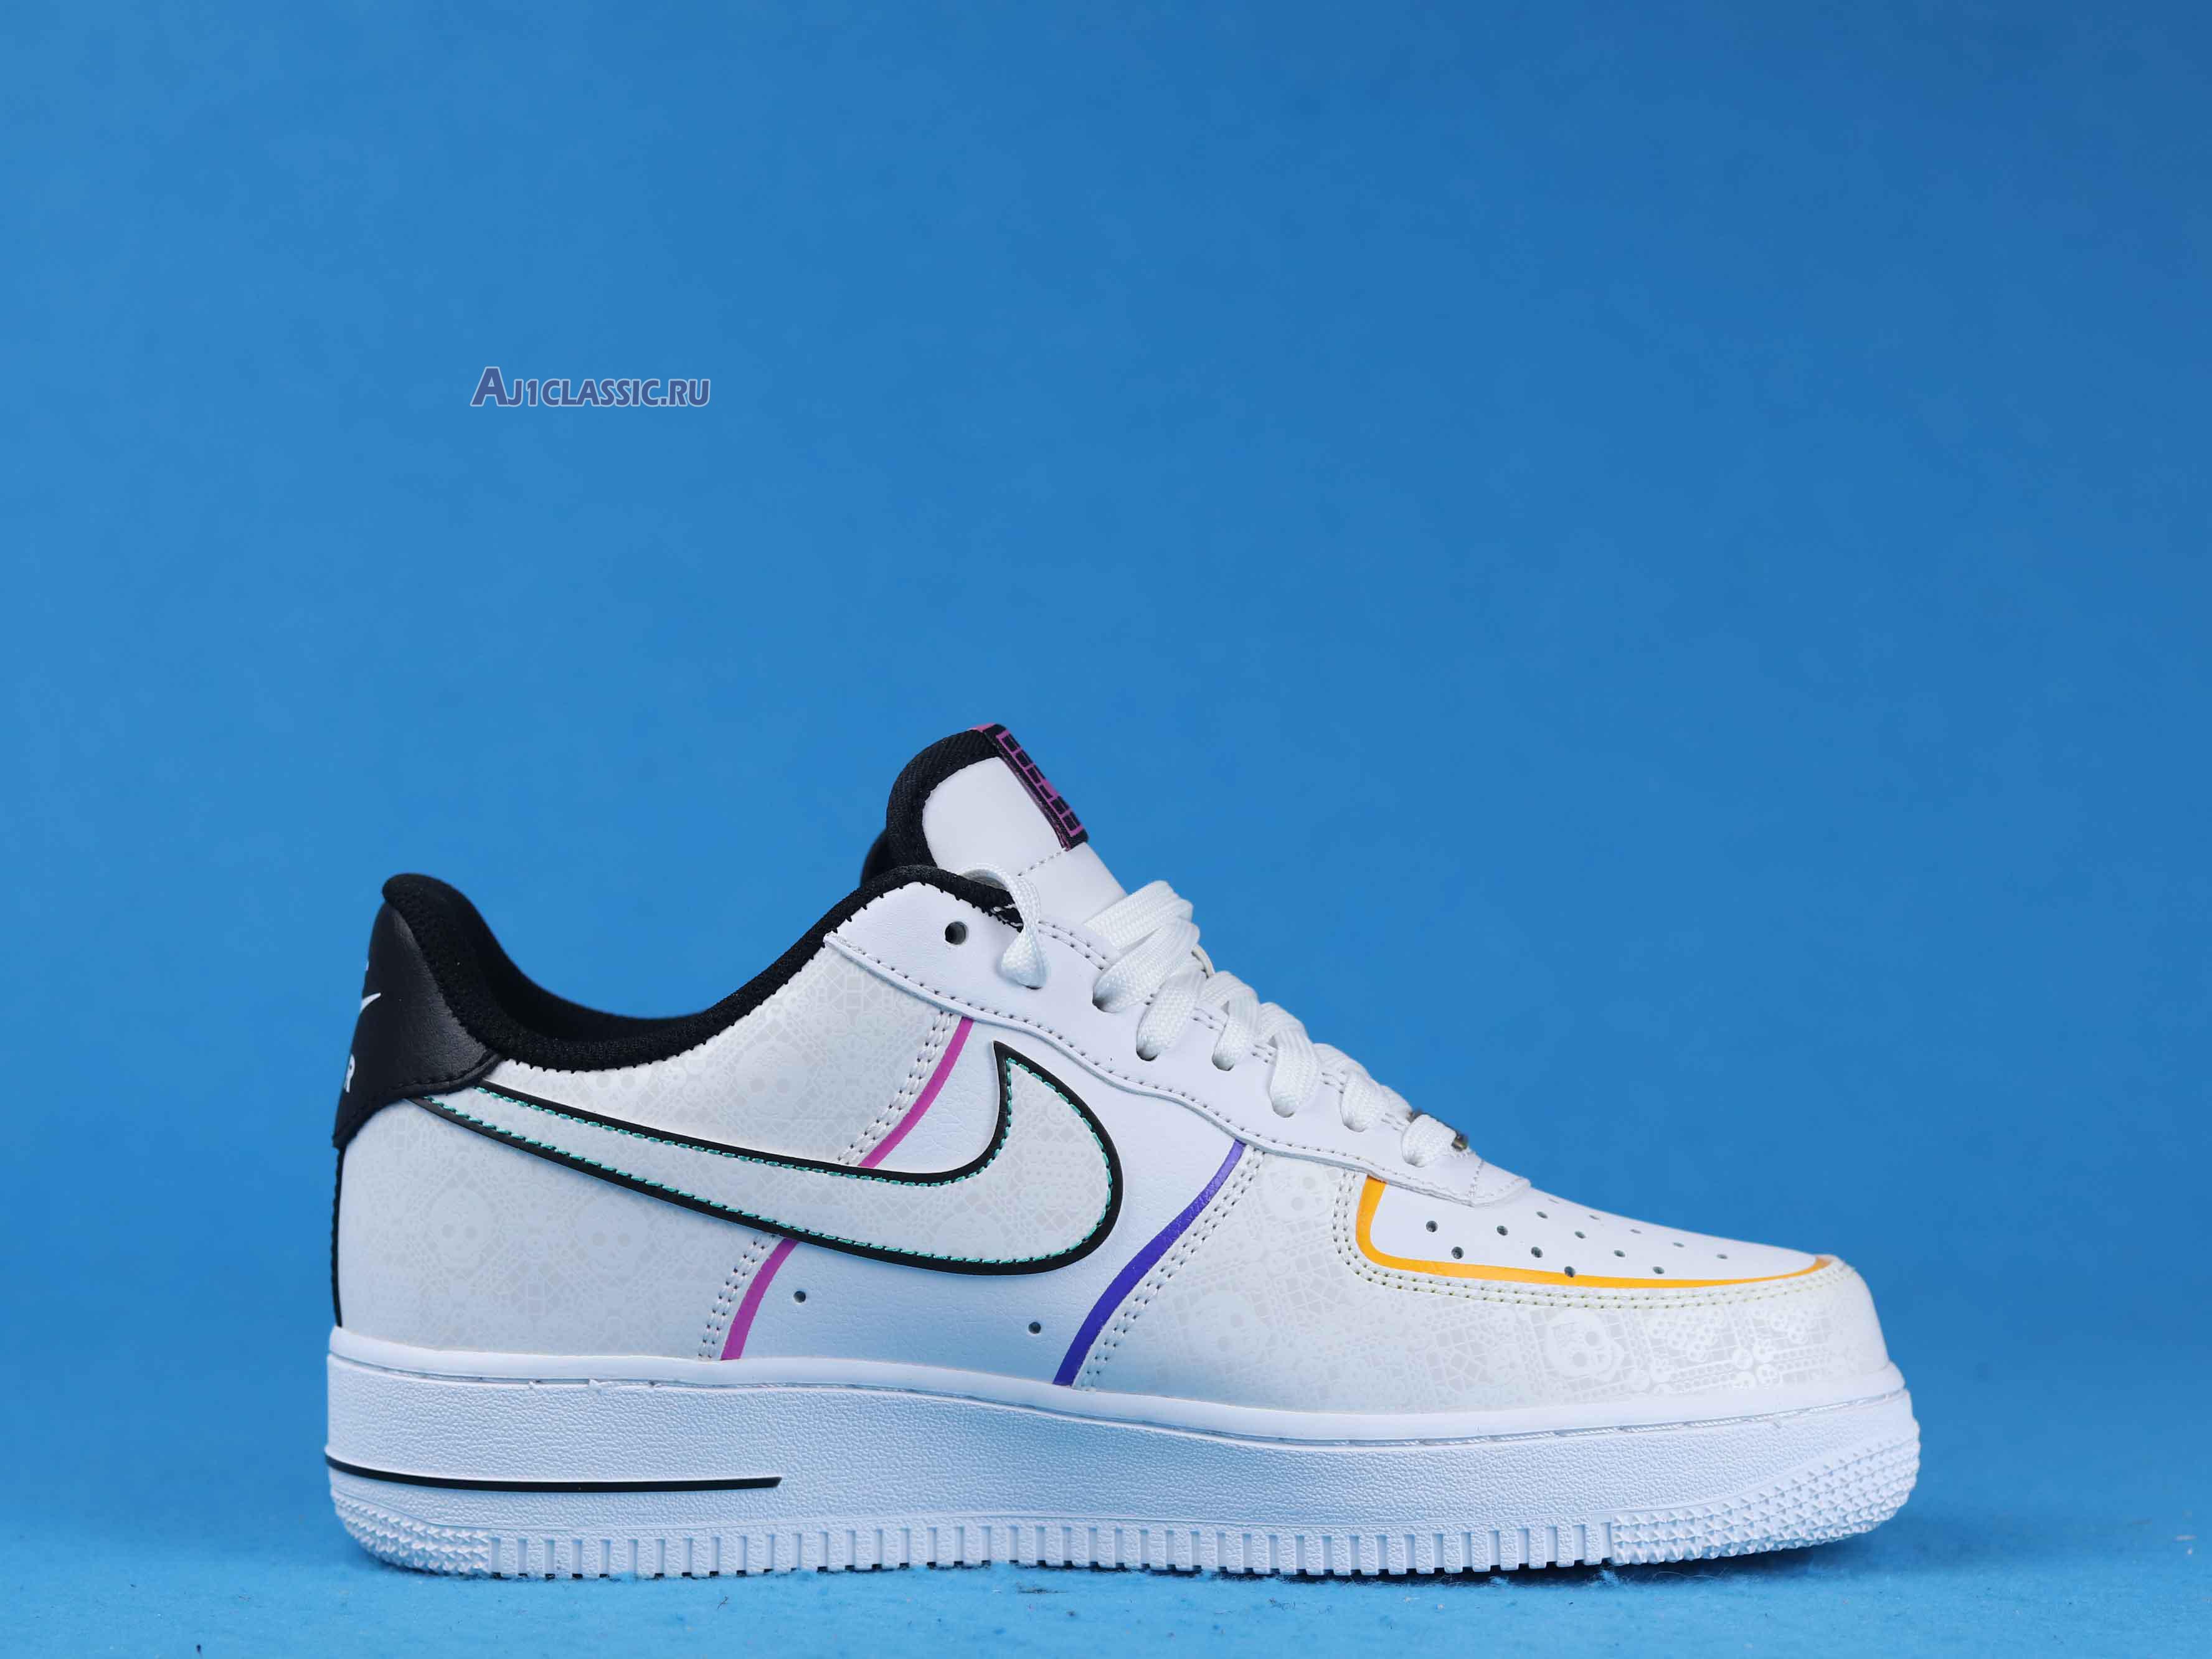 Nike Air Force 1 Low "Day of the Dead" CT1138-100